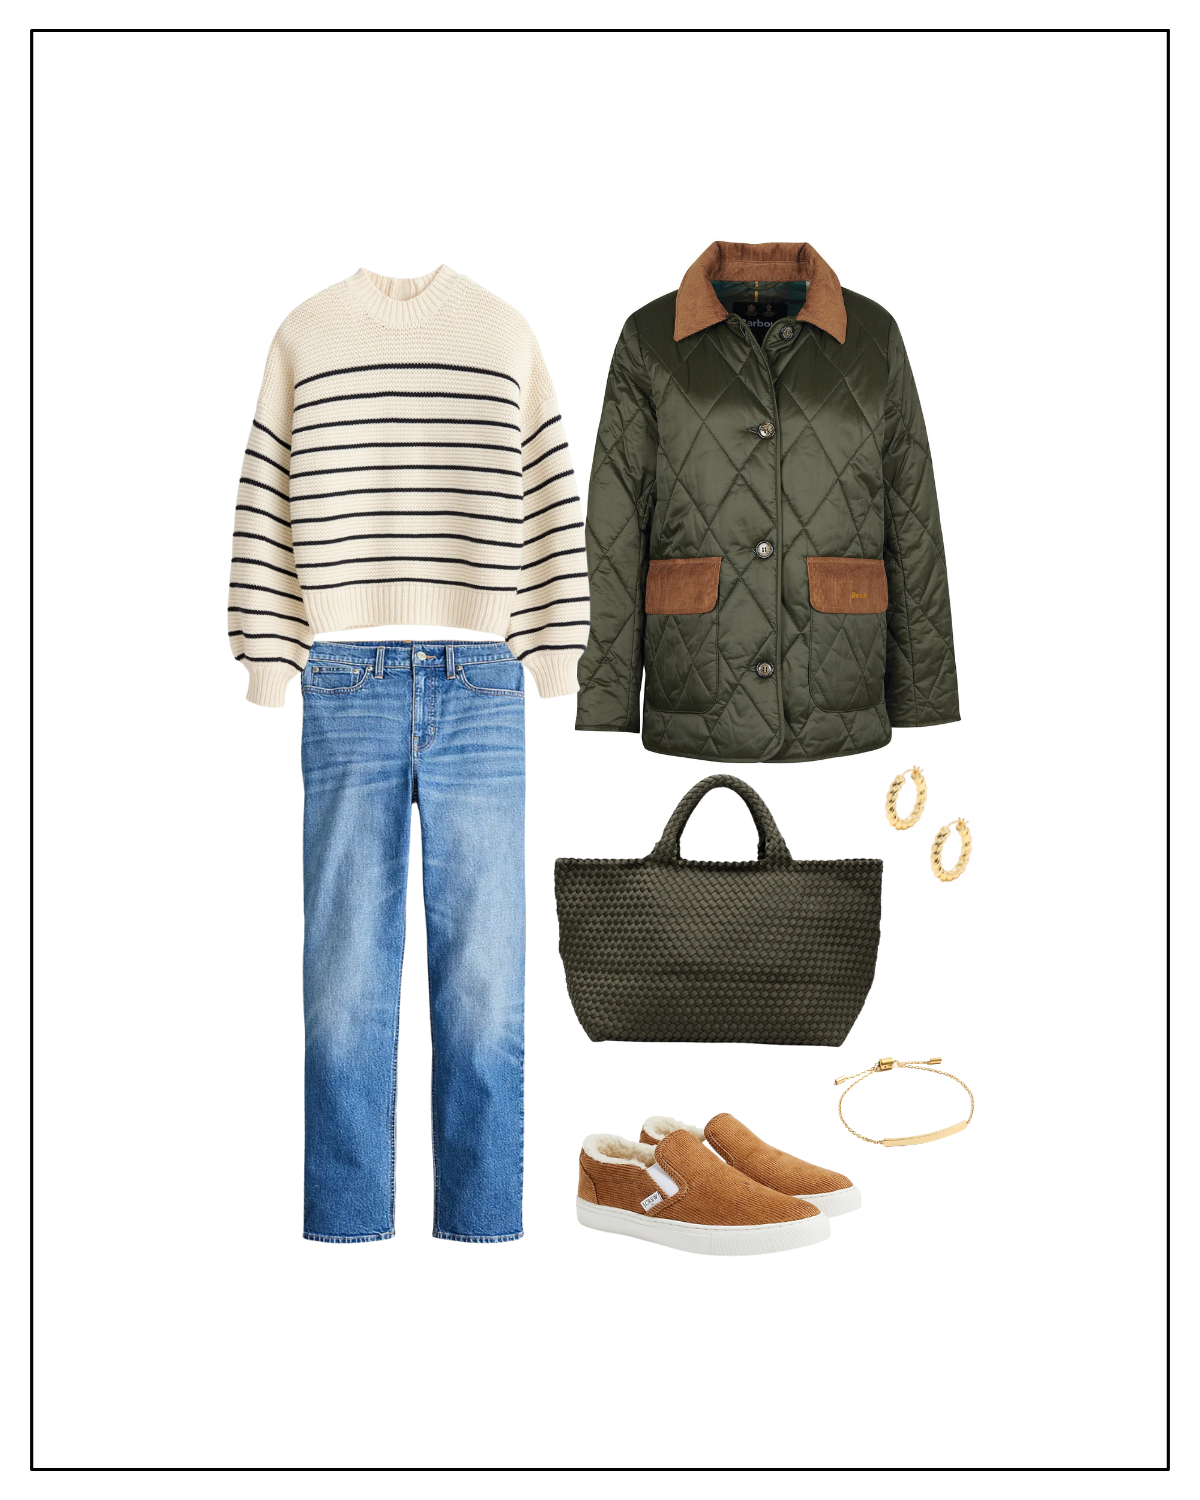 How to Style a Striped Sweater with quilted coat